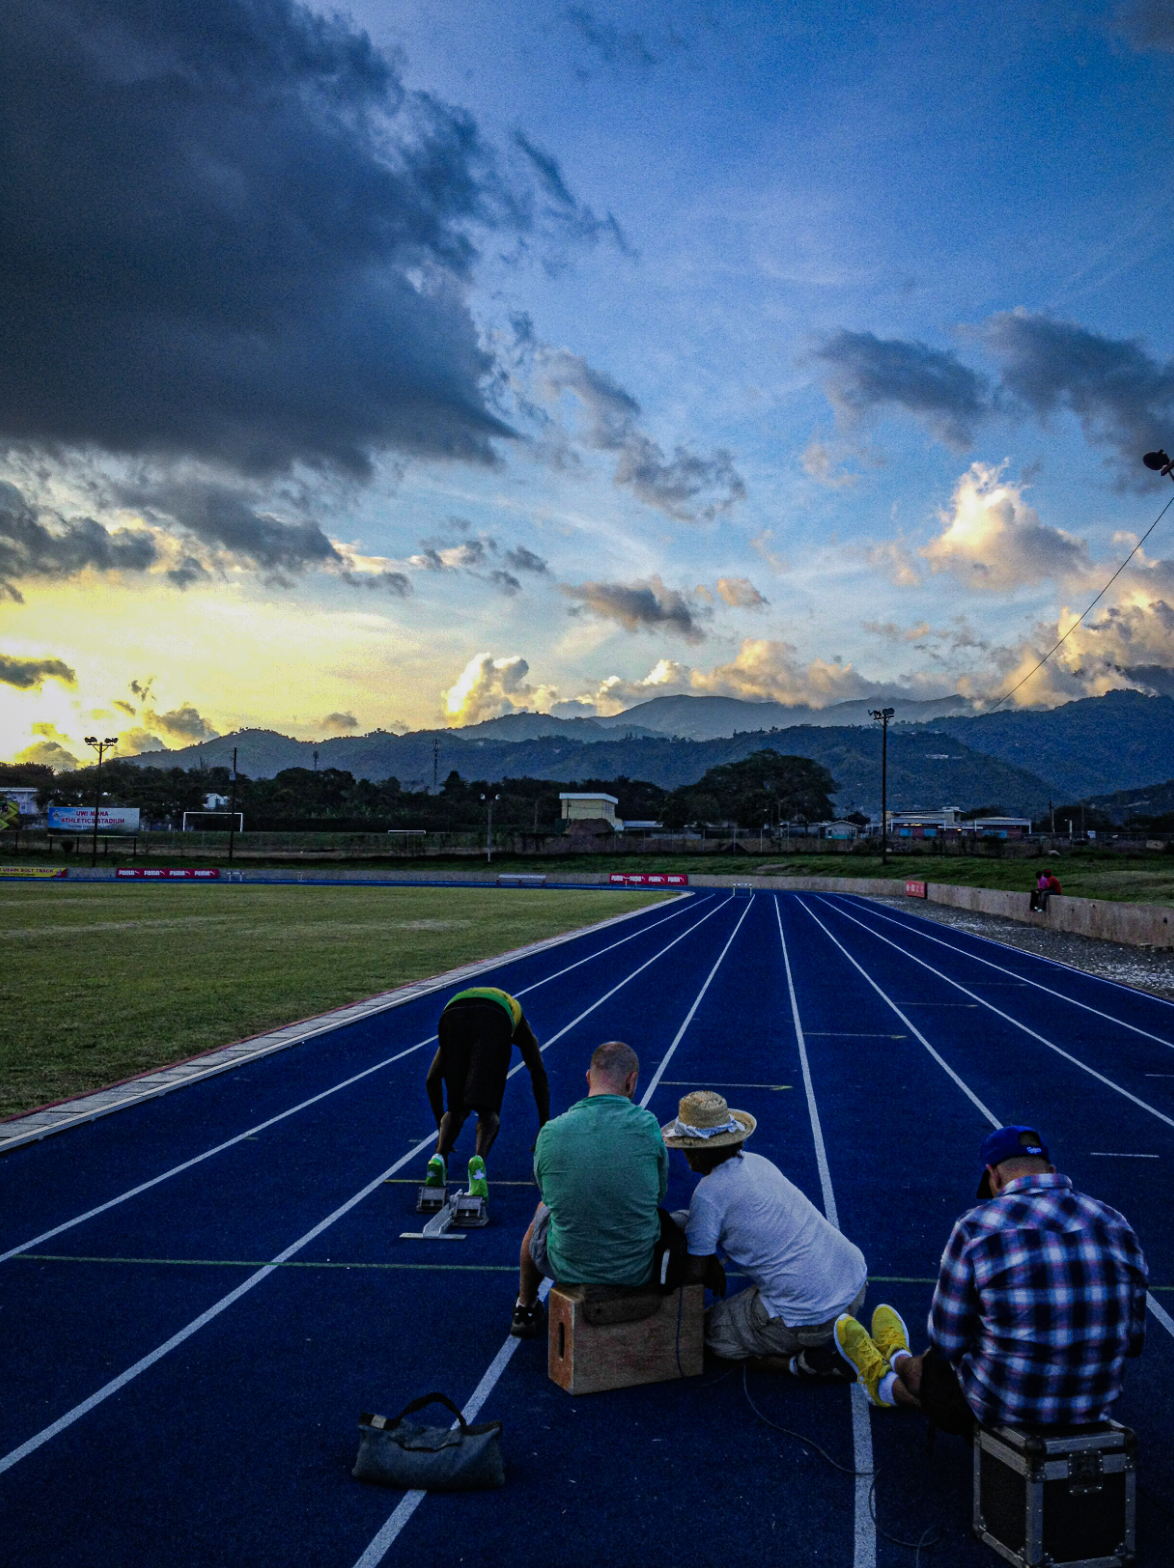 Jamaican national team practice track with mountains in the background